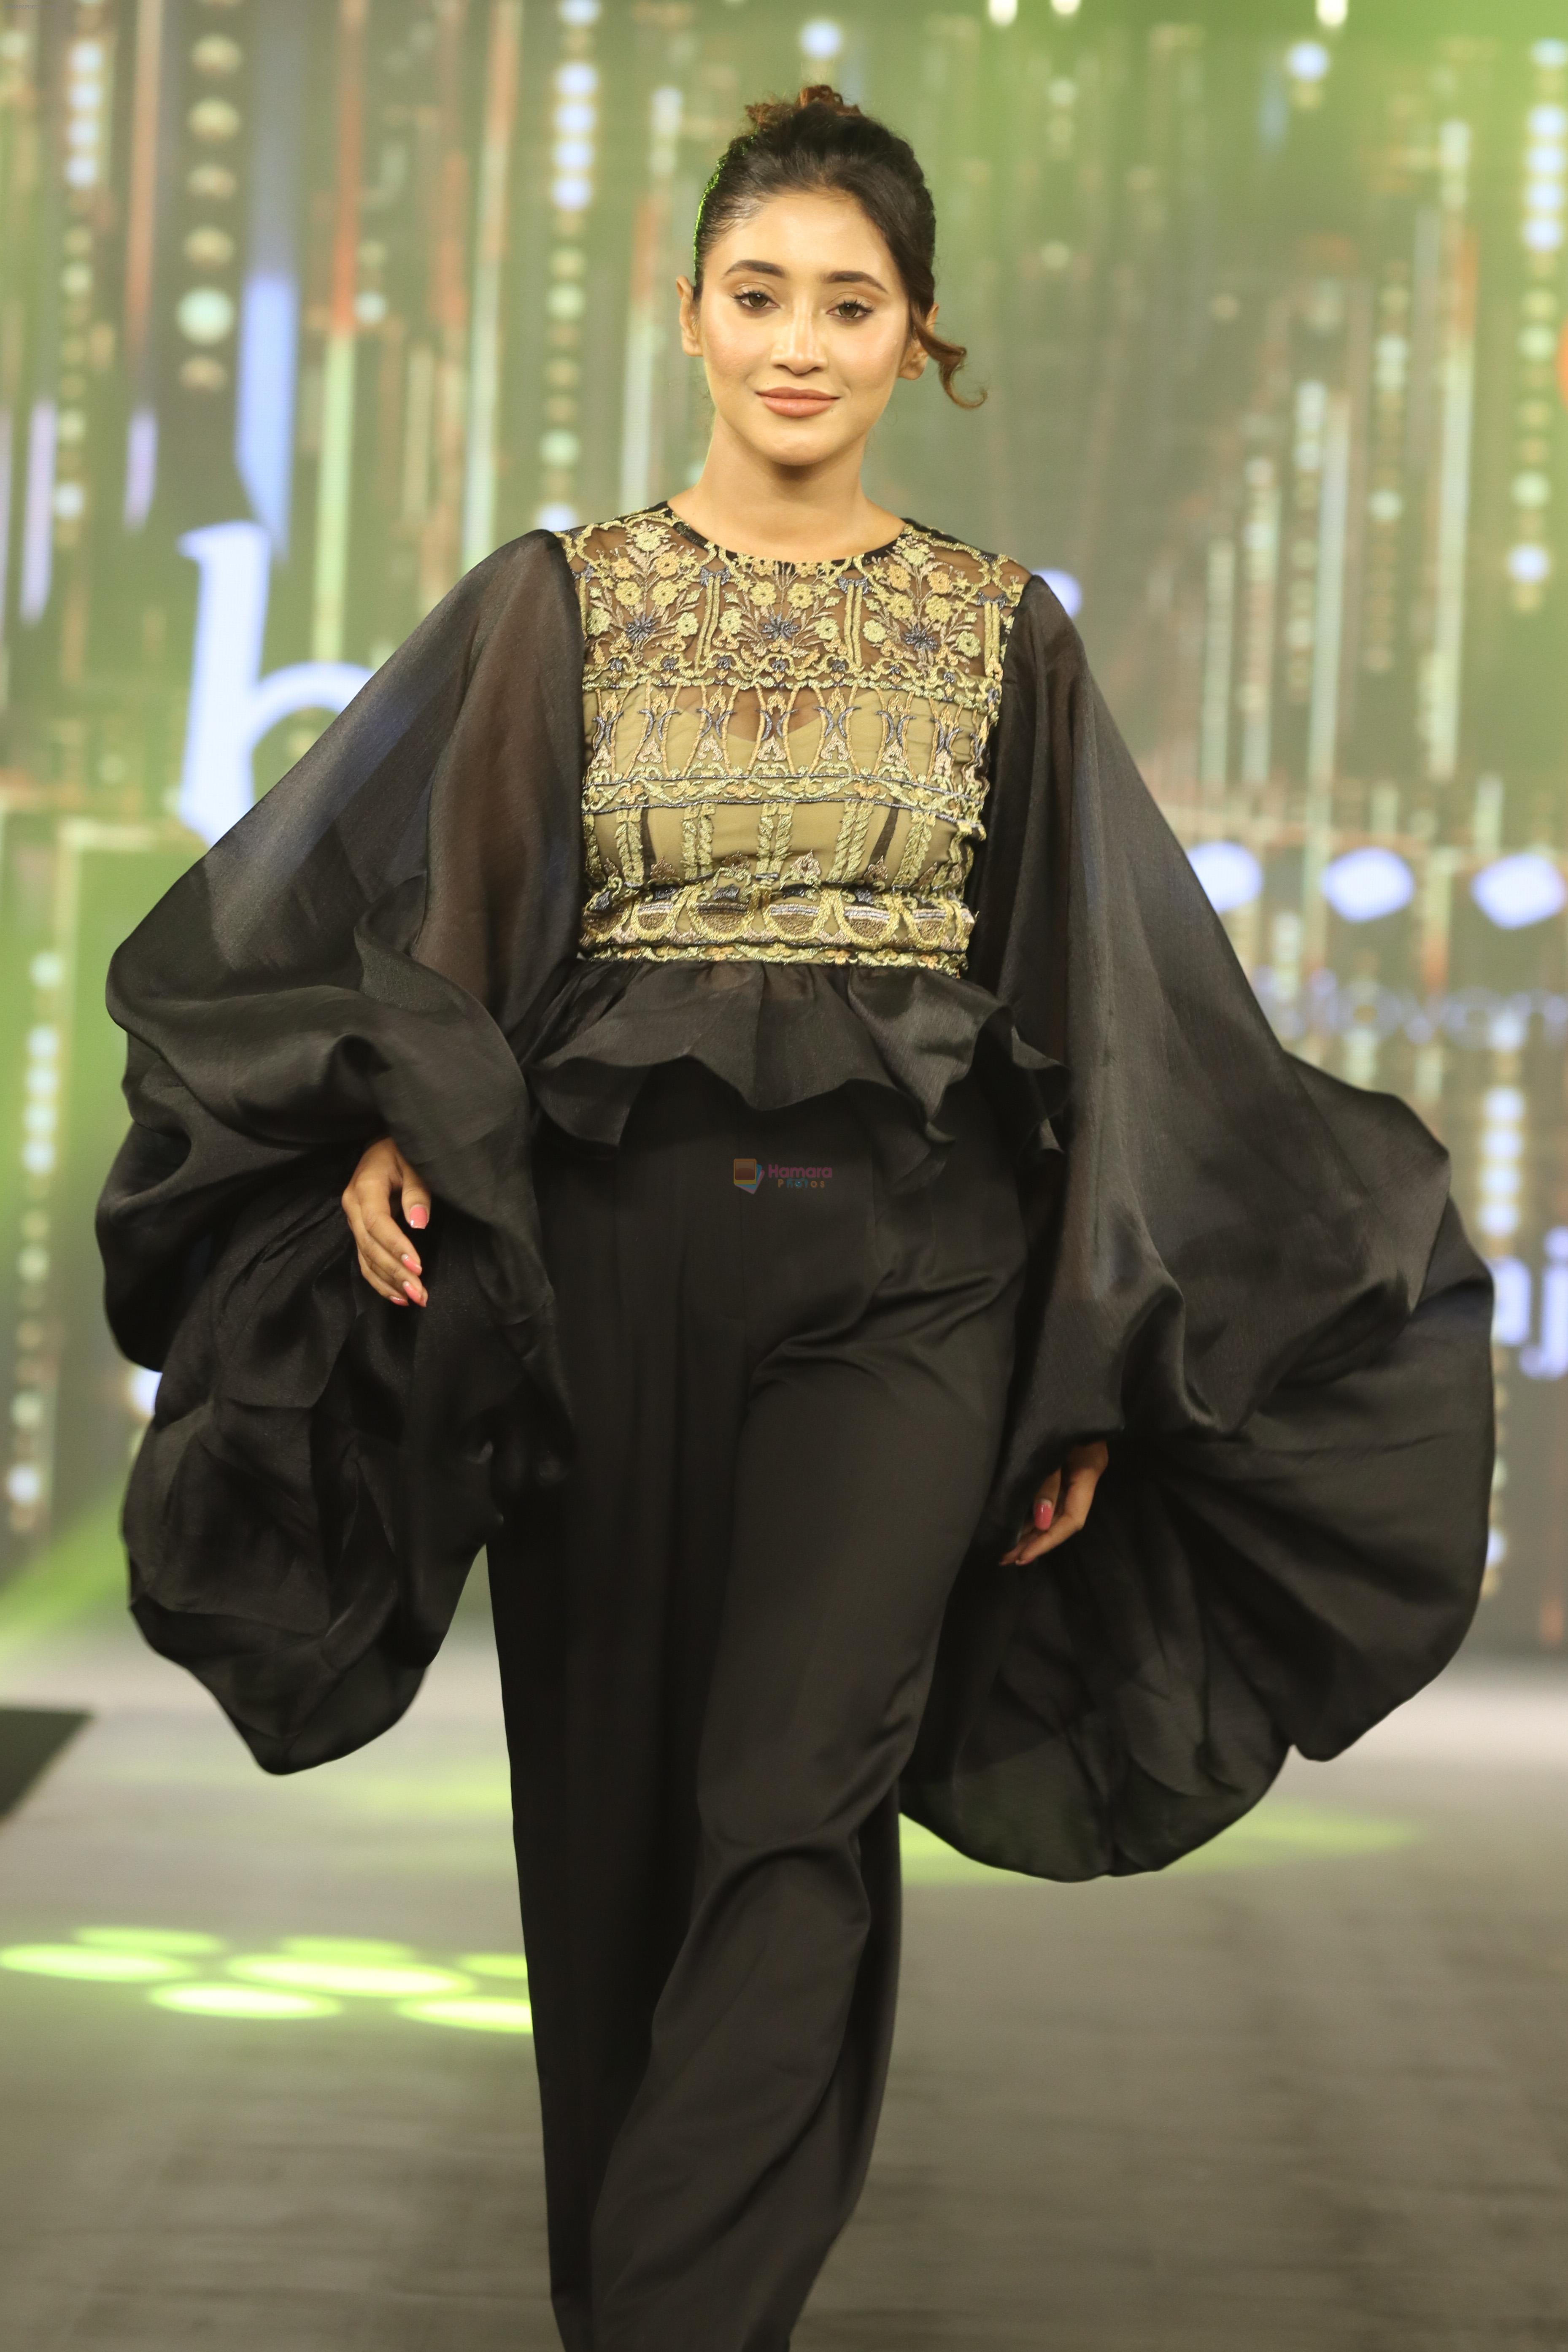 Shivangi Joshi on the ramp during 17th Edition of BETI A Fashion Fundraiser Show on 14 May 2023